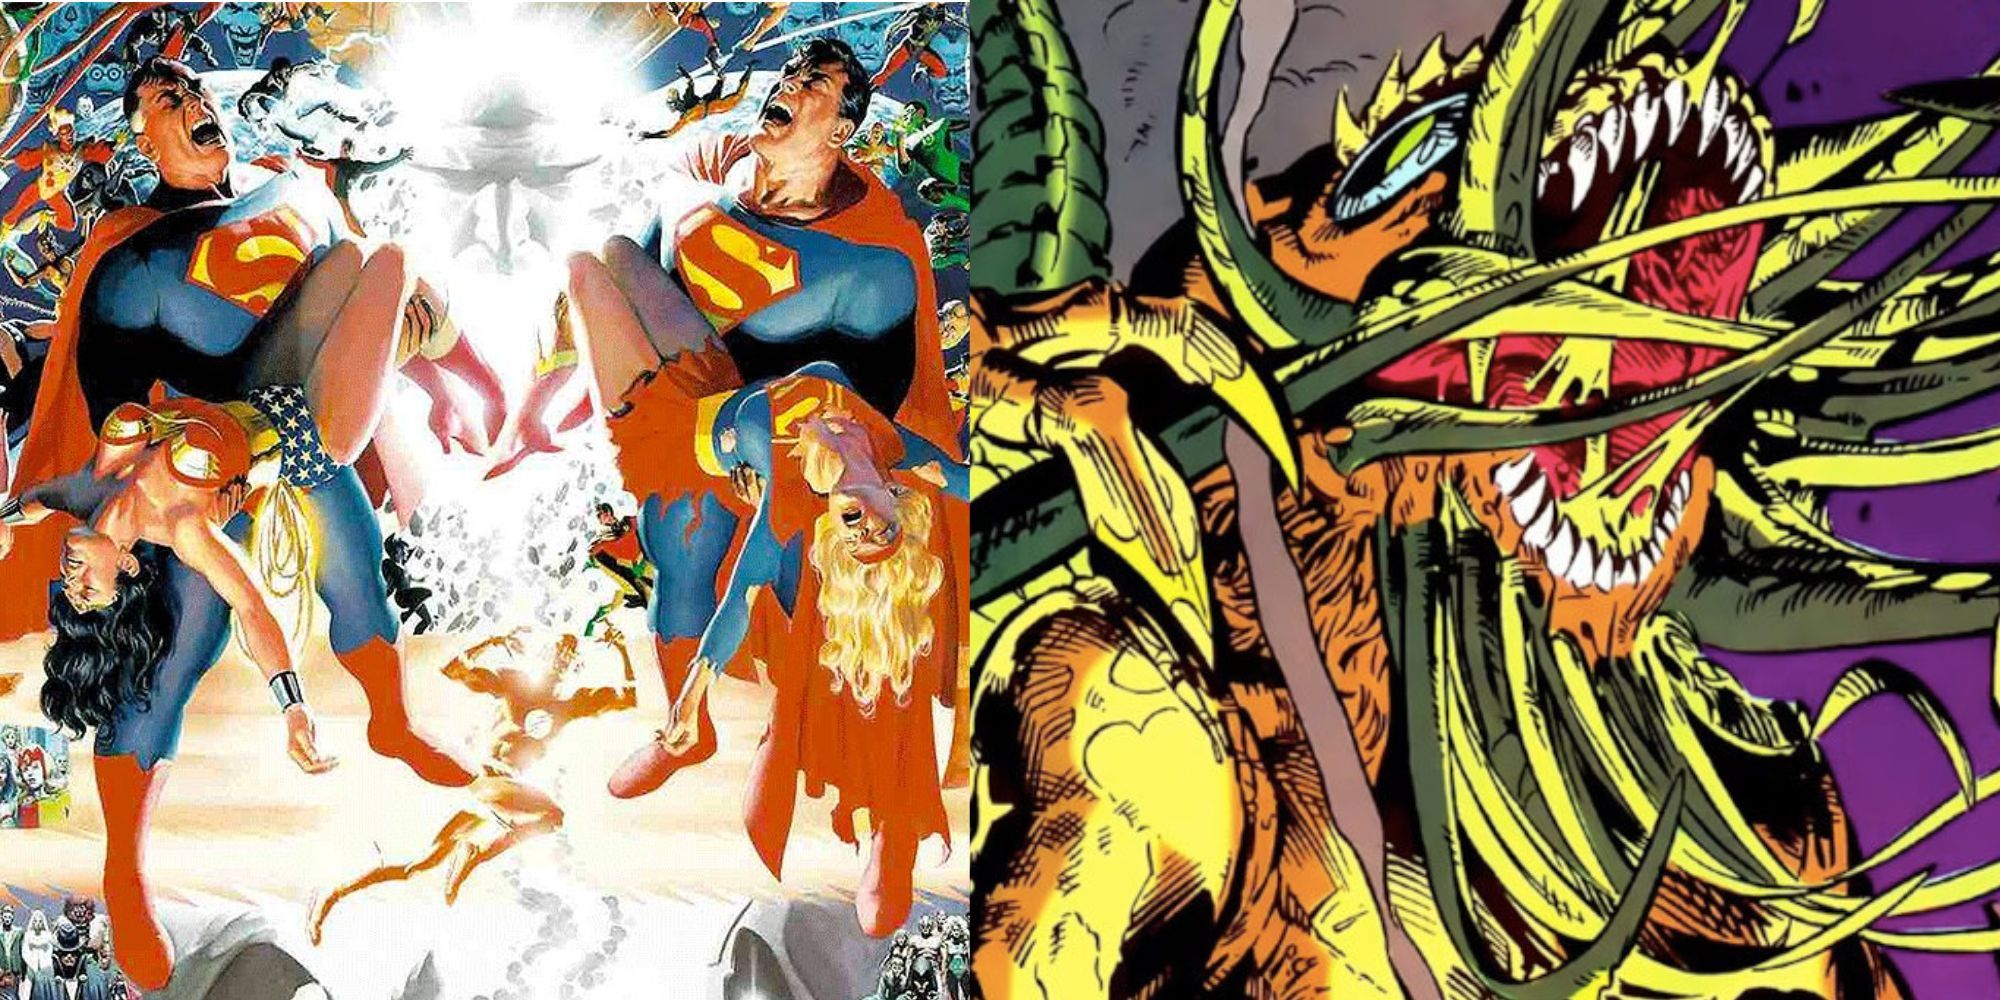 A split image of two different Supermen holding Wonder Woman and Supergirl in Crisis on Infinite Earths and an alien from DC Bloodlines